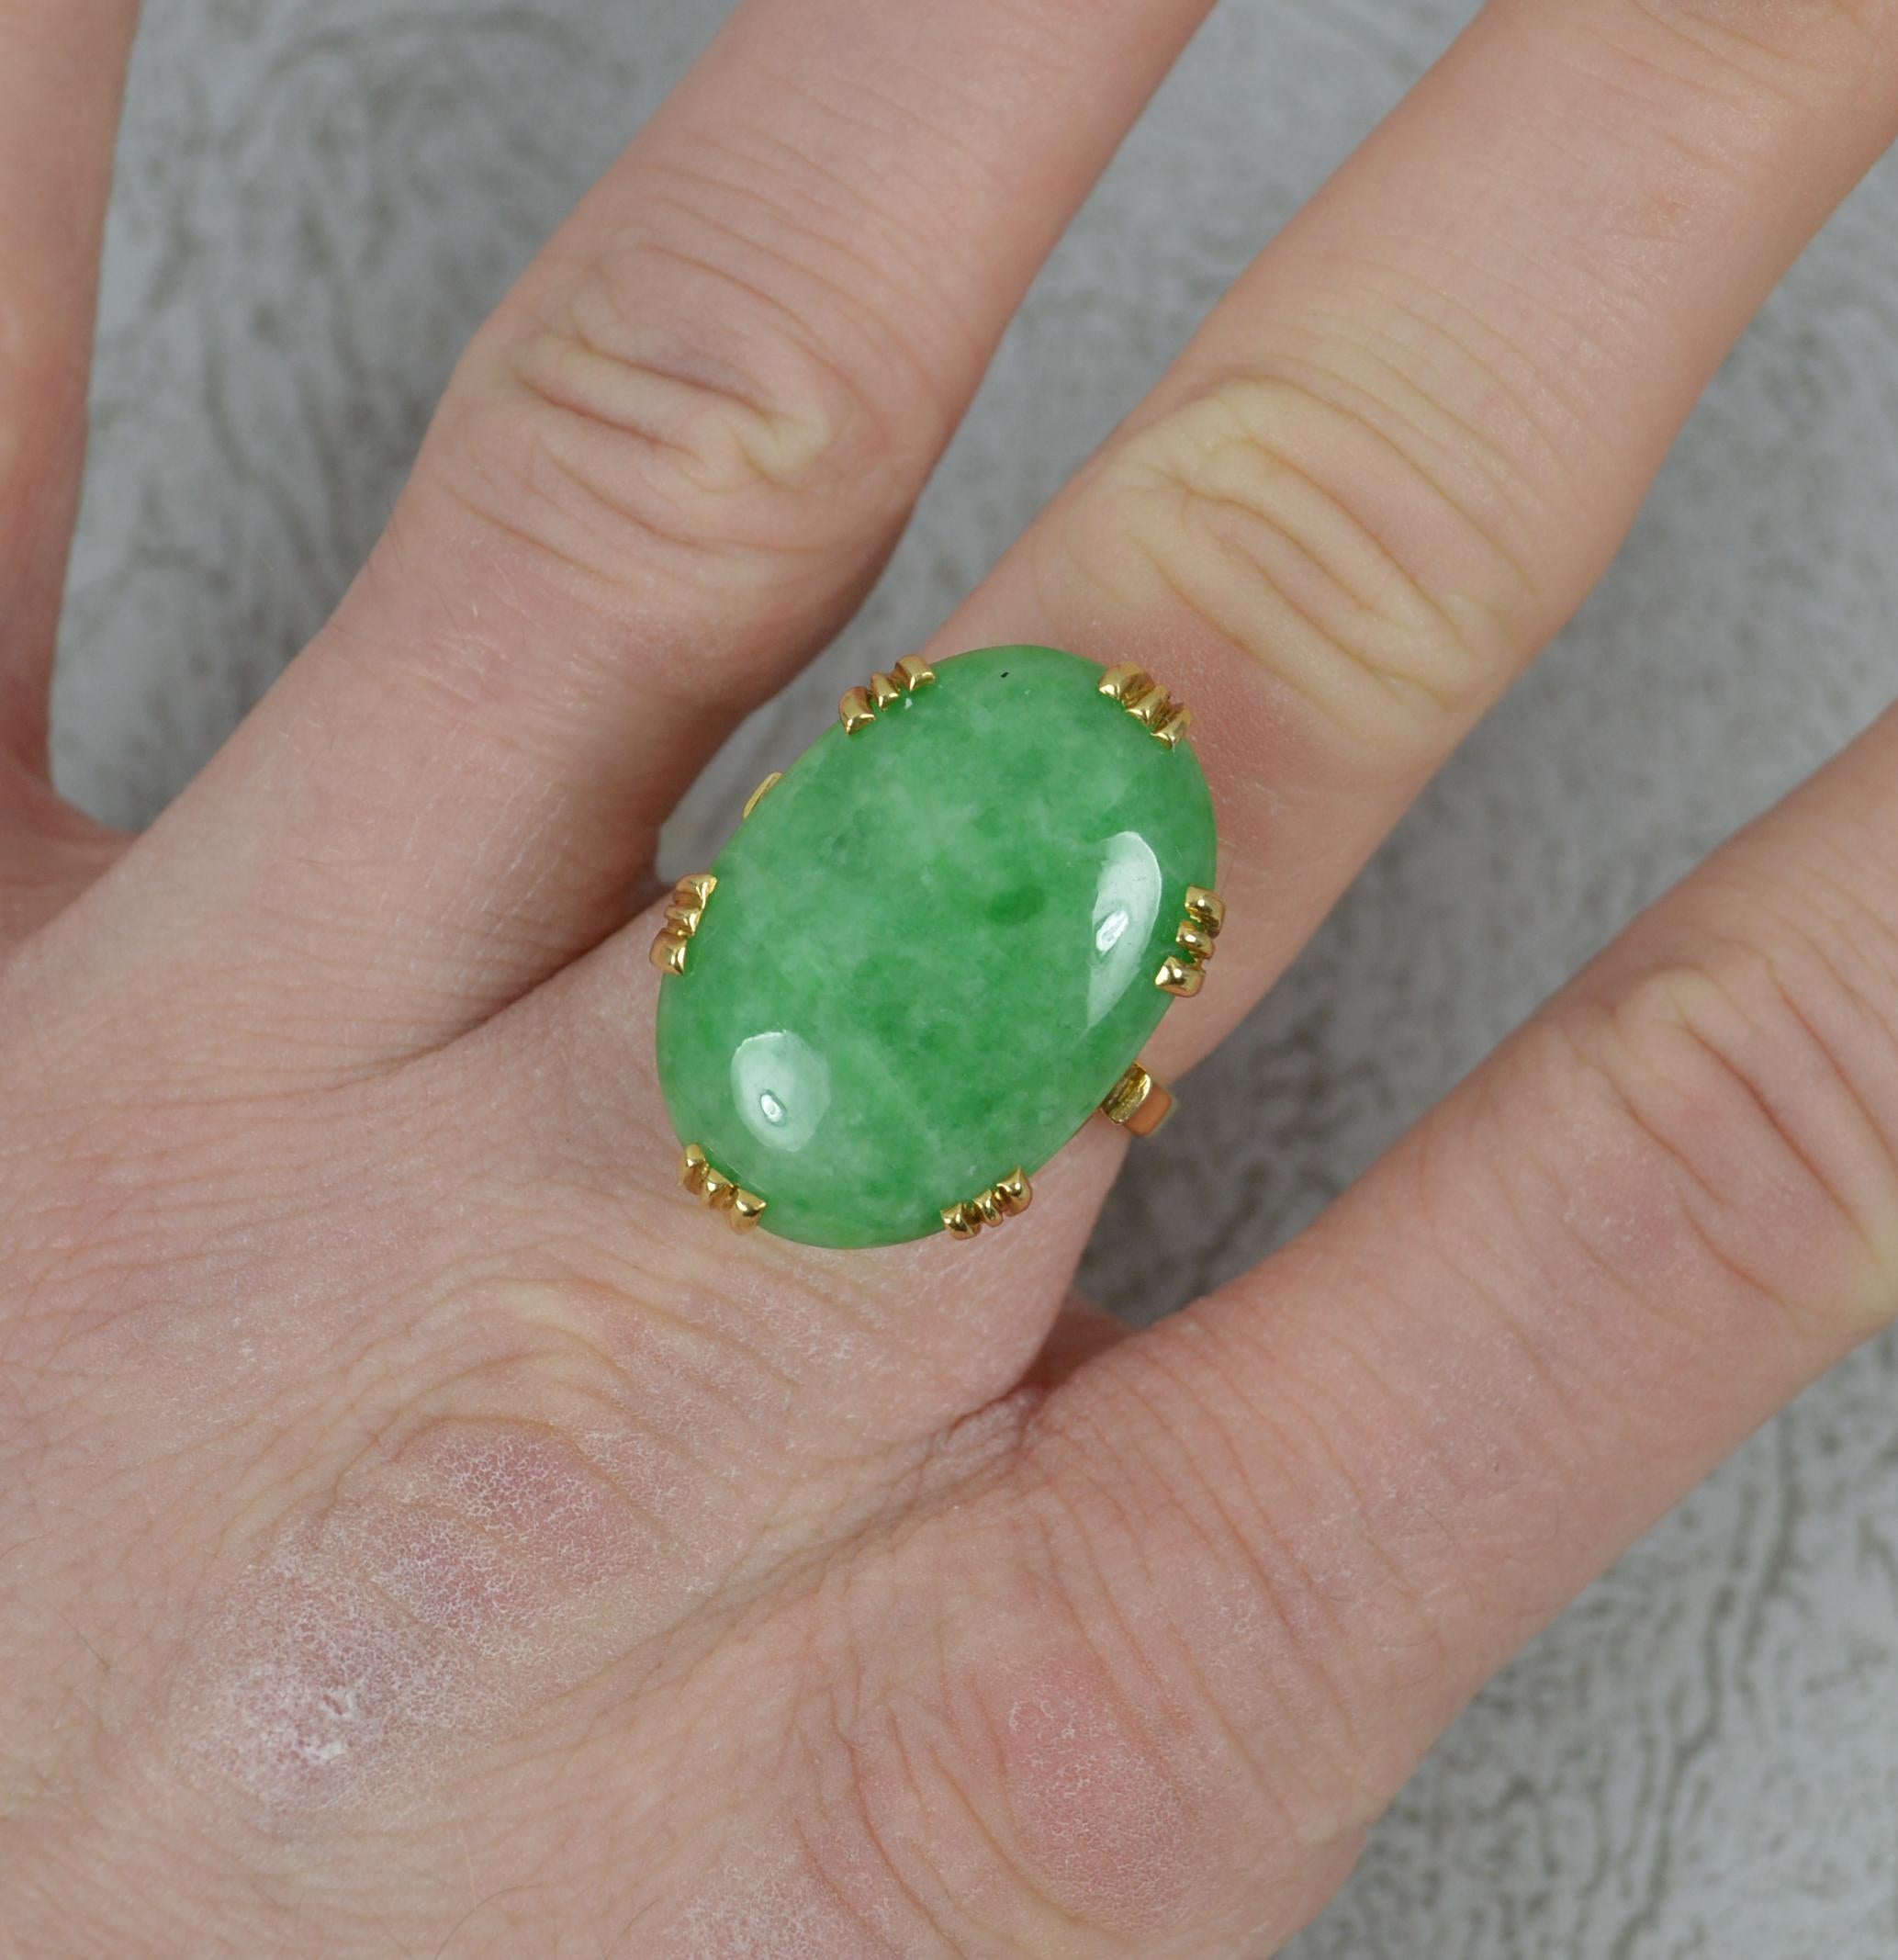 A superb Jade solitaire statement ring.
Solid 18 carat yellow gold example.
Designed with a single, oval shaped natural jade in multi claw setting. A large single stone.
16mm x 24mm cluster head. Protruding 8mm off the finger.

CONDITION ;